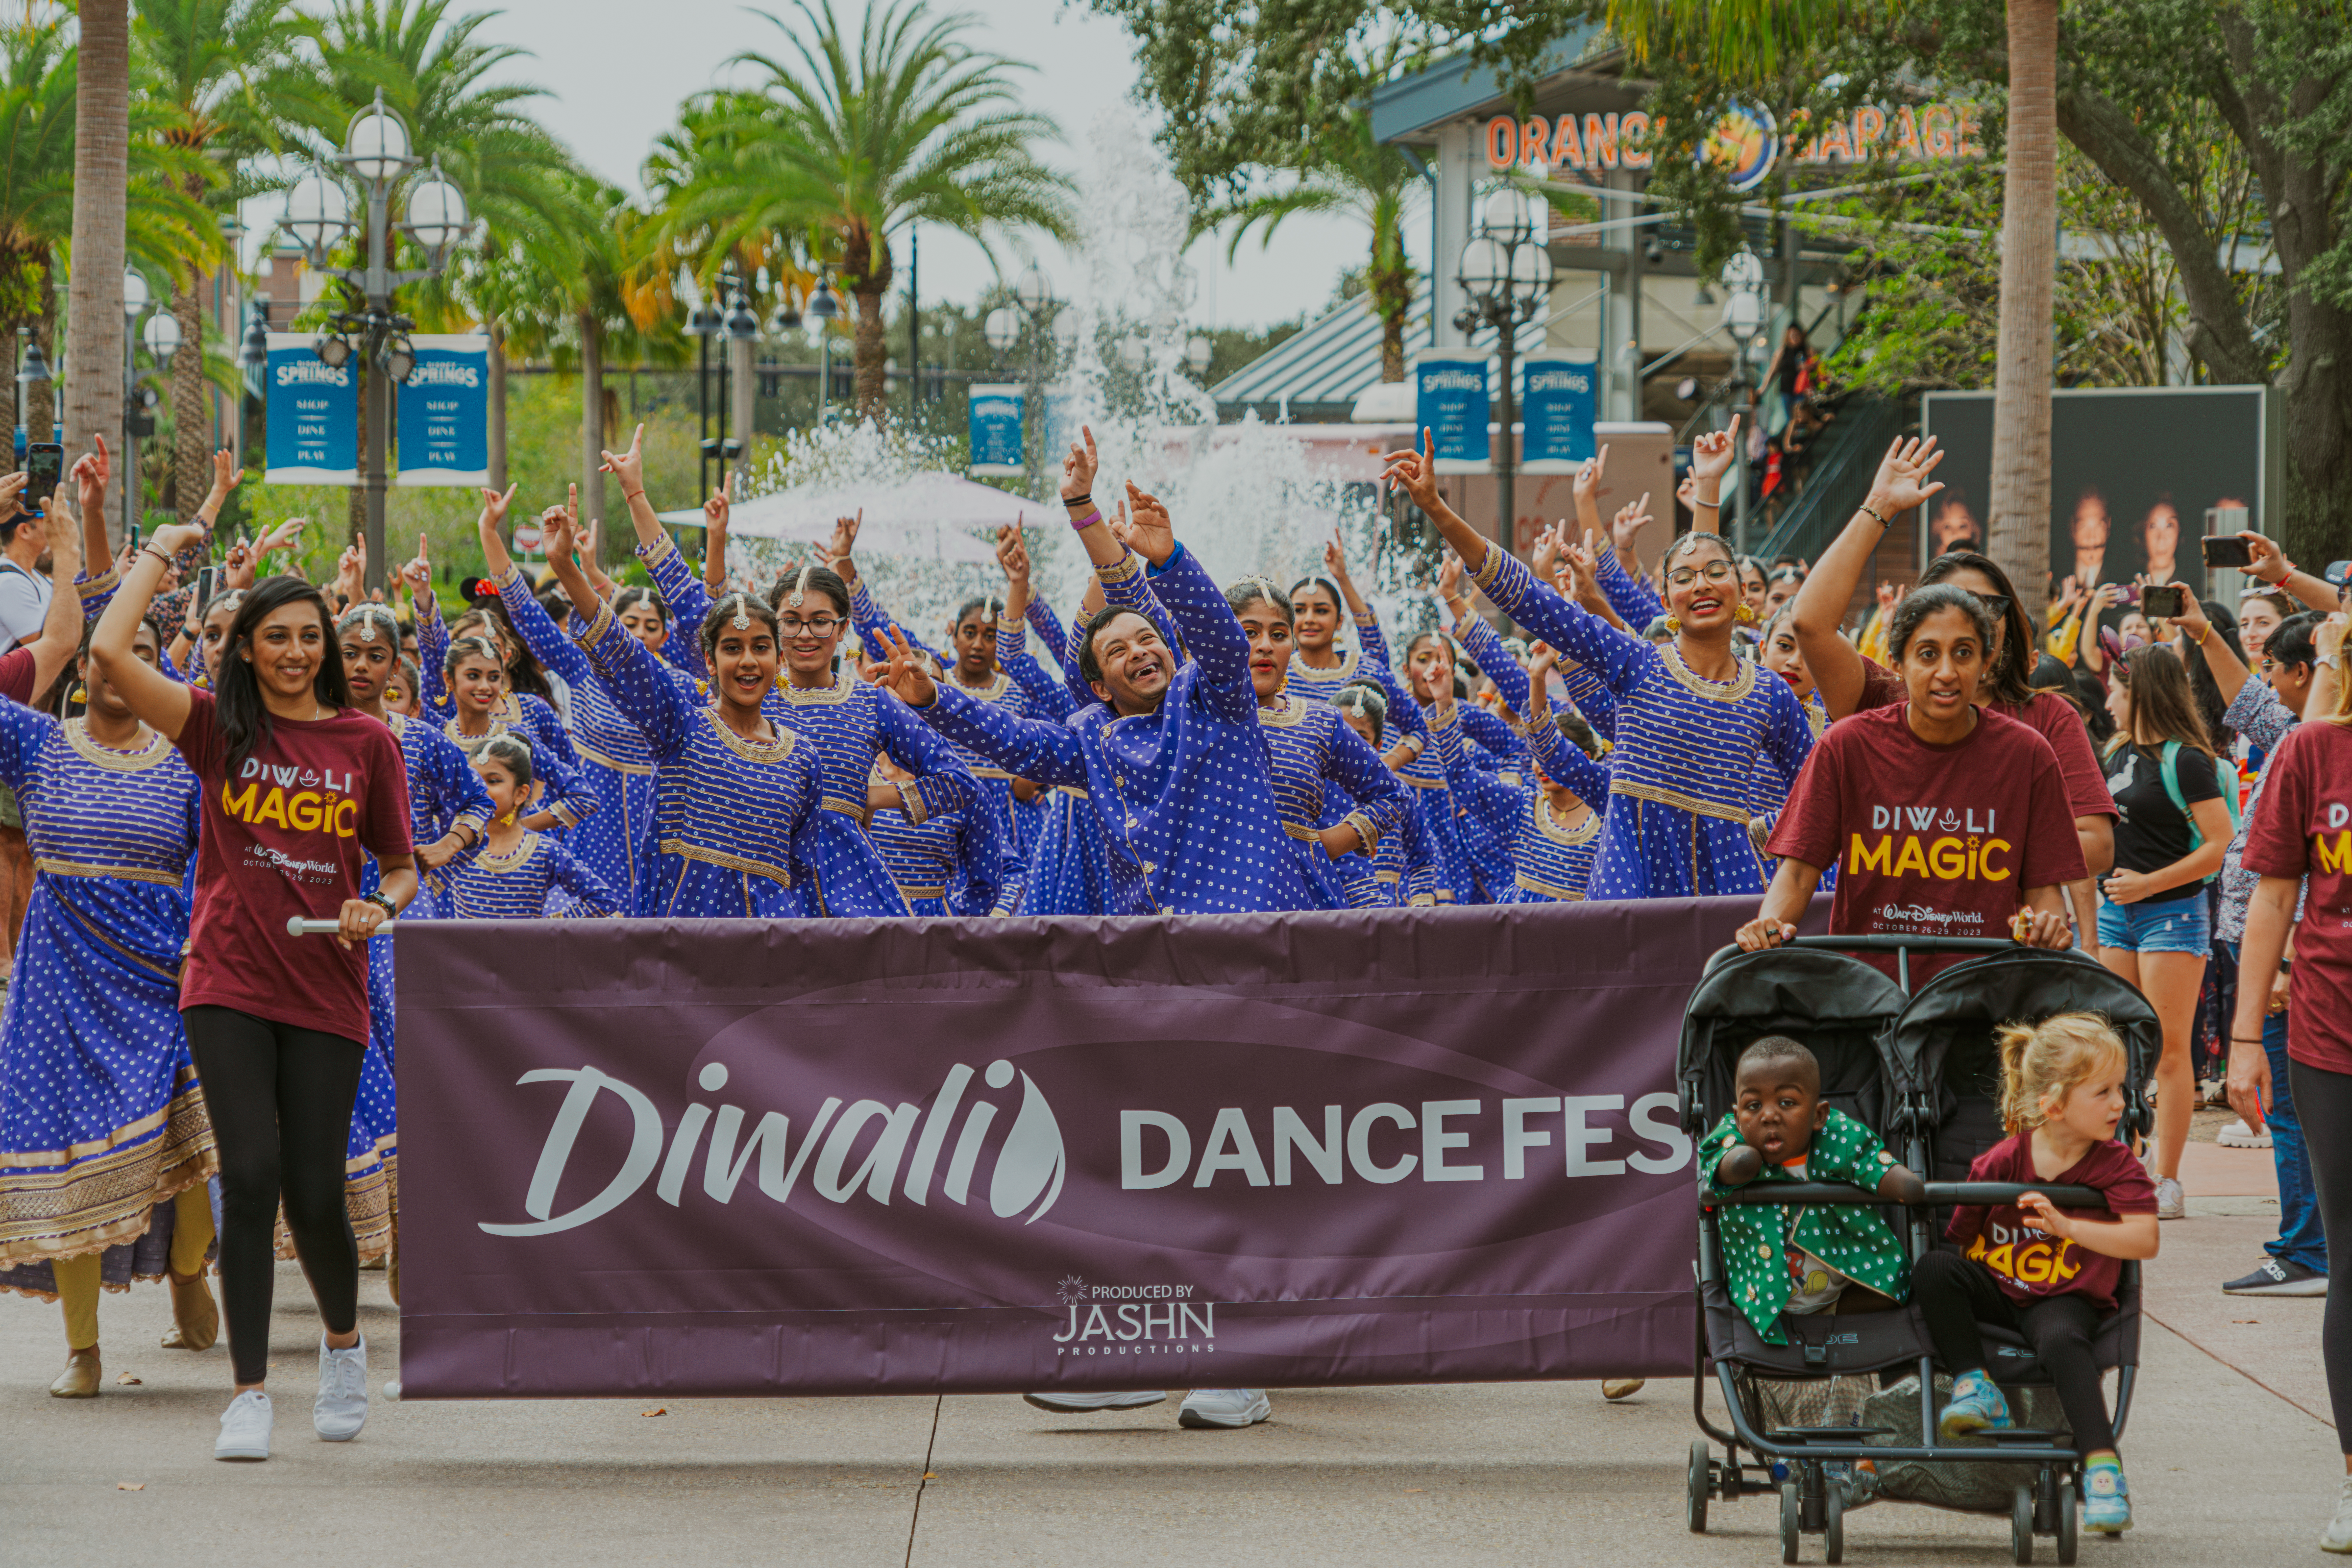 Diwali Dance Fest Makes History at Walt Disney World® Resort: Scenes from the 20-minute parade. Photo Credit: Geo Media Co.